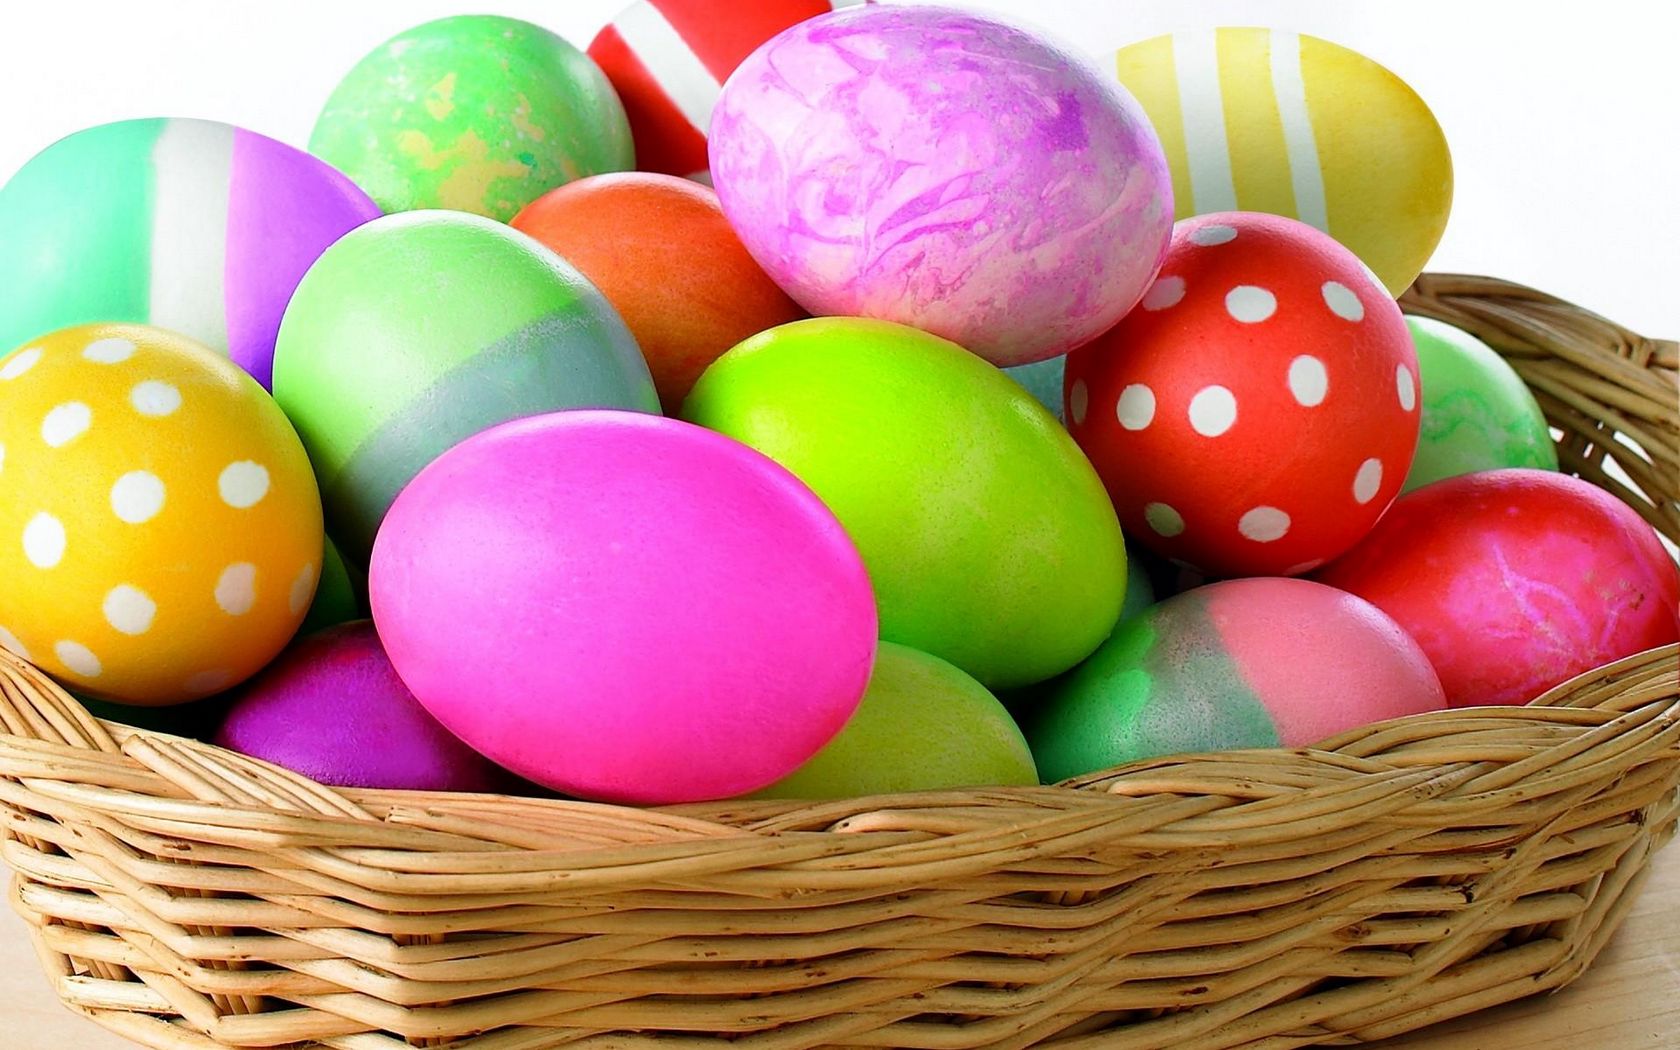 Download wallpaper 1680x1050 easter, holiday, eggs, colored, bright, mountain, colorful, basket widescreen 16:10 HD background